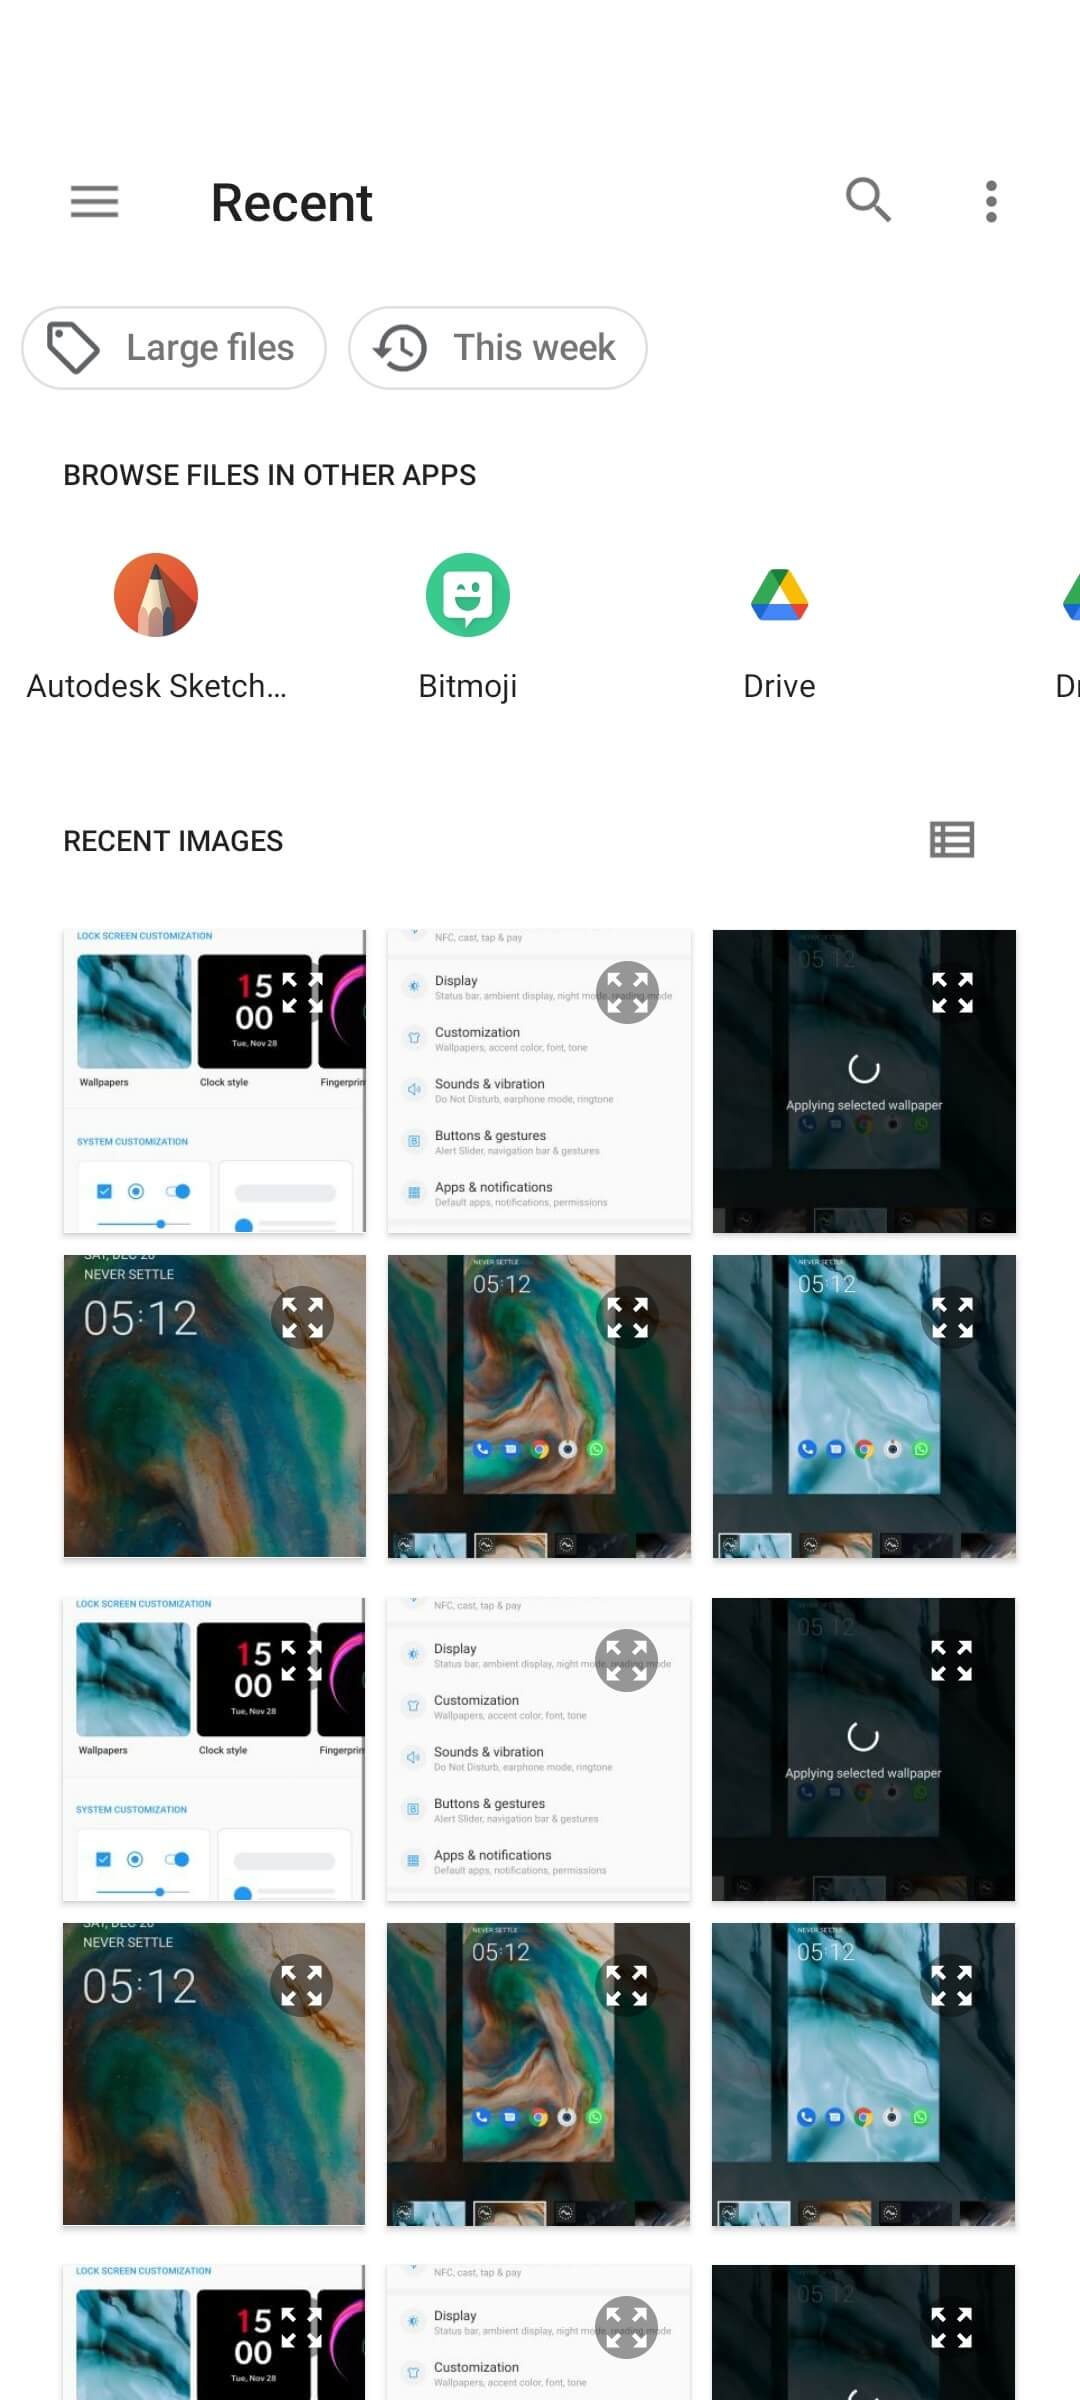 How to Change Wallpaper on Android Mobile/Tablet - TechOwns